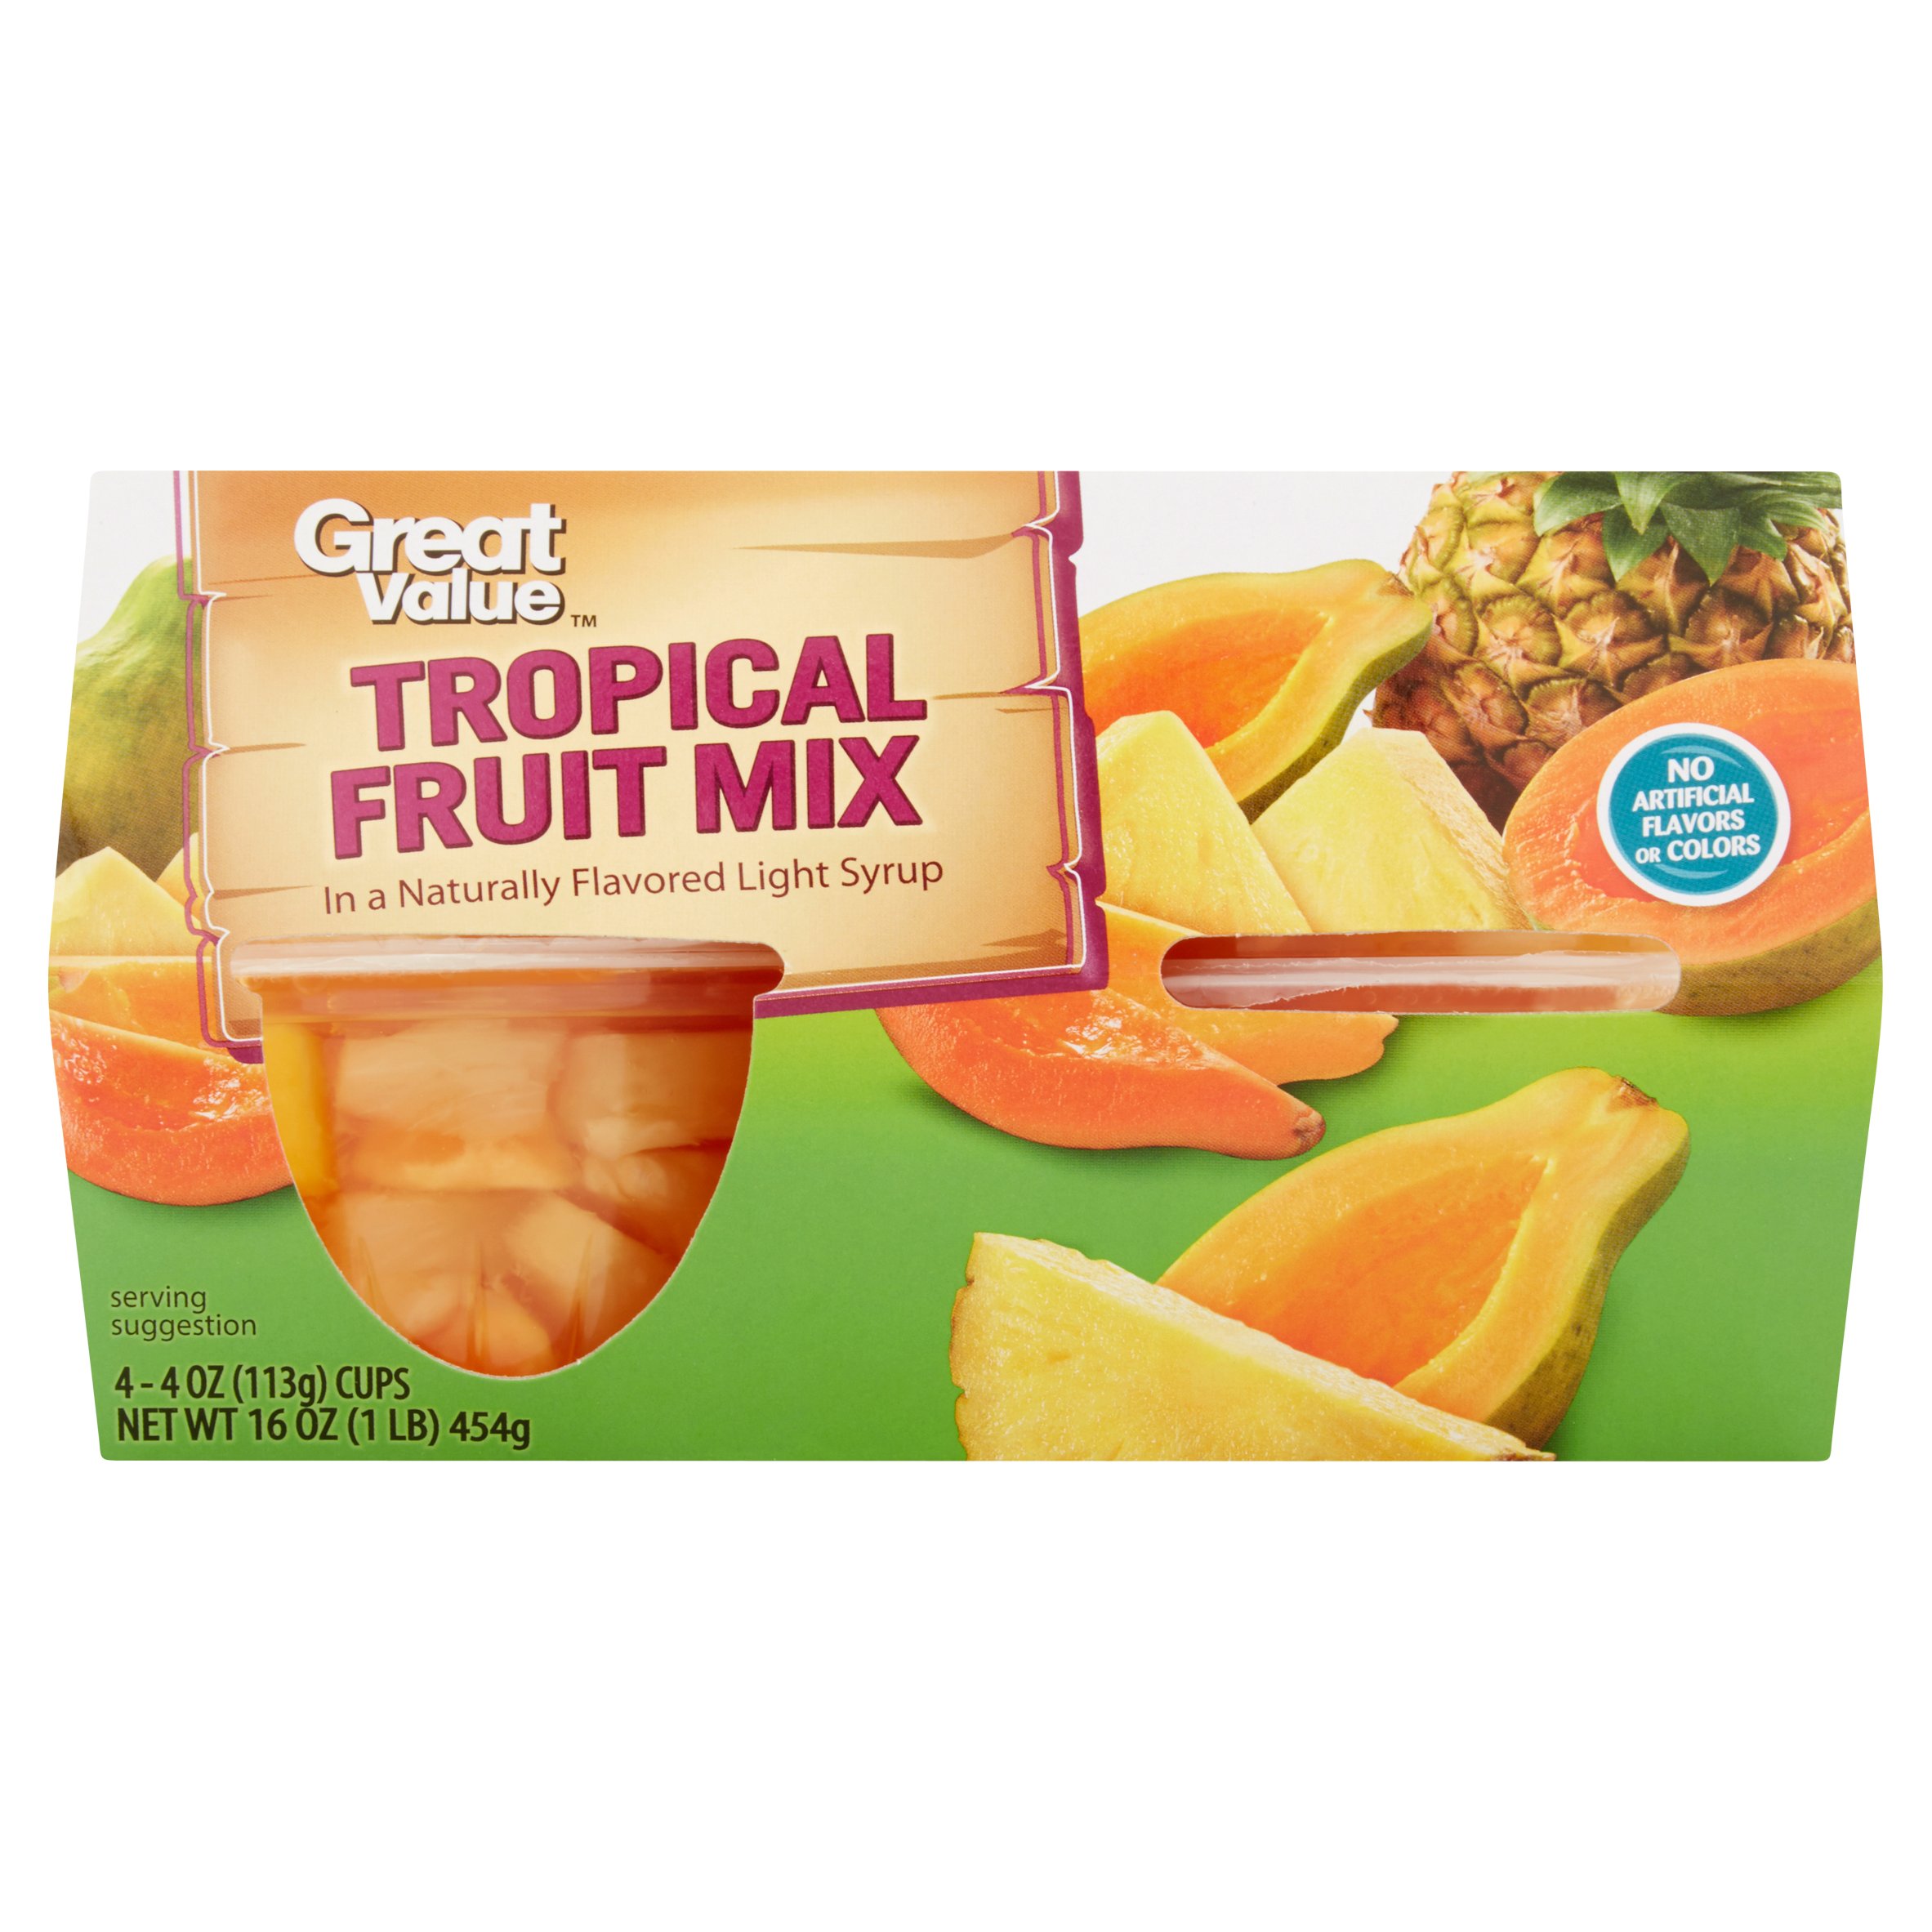 Great Value Tropical Fruit Mix in Light Syrup, 4 Oz, 4 Count Image